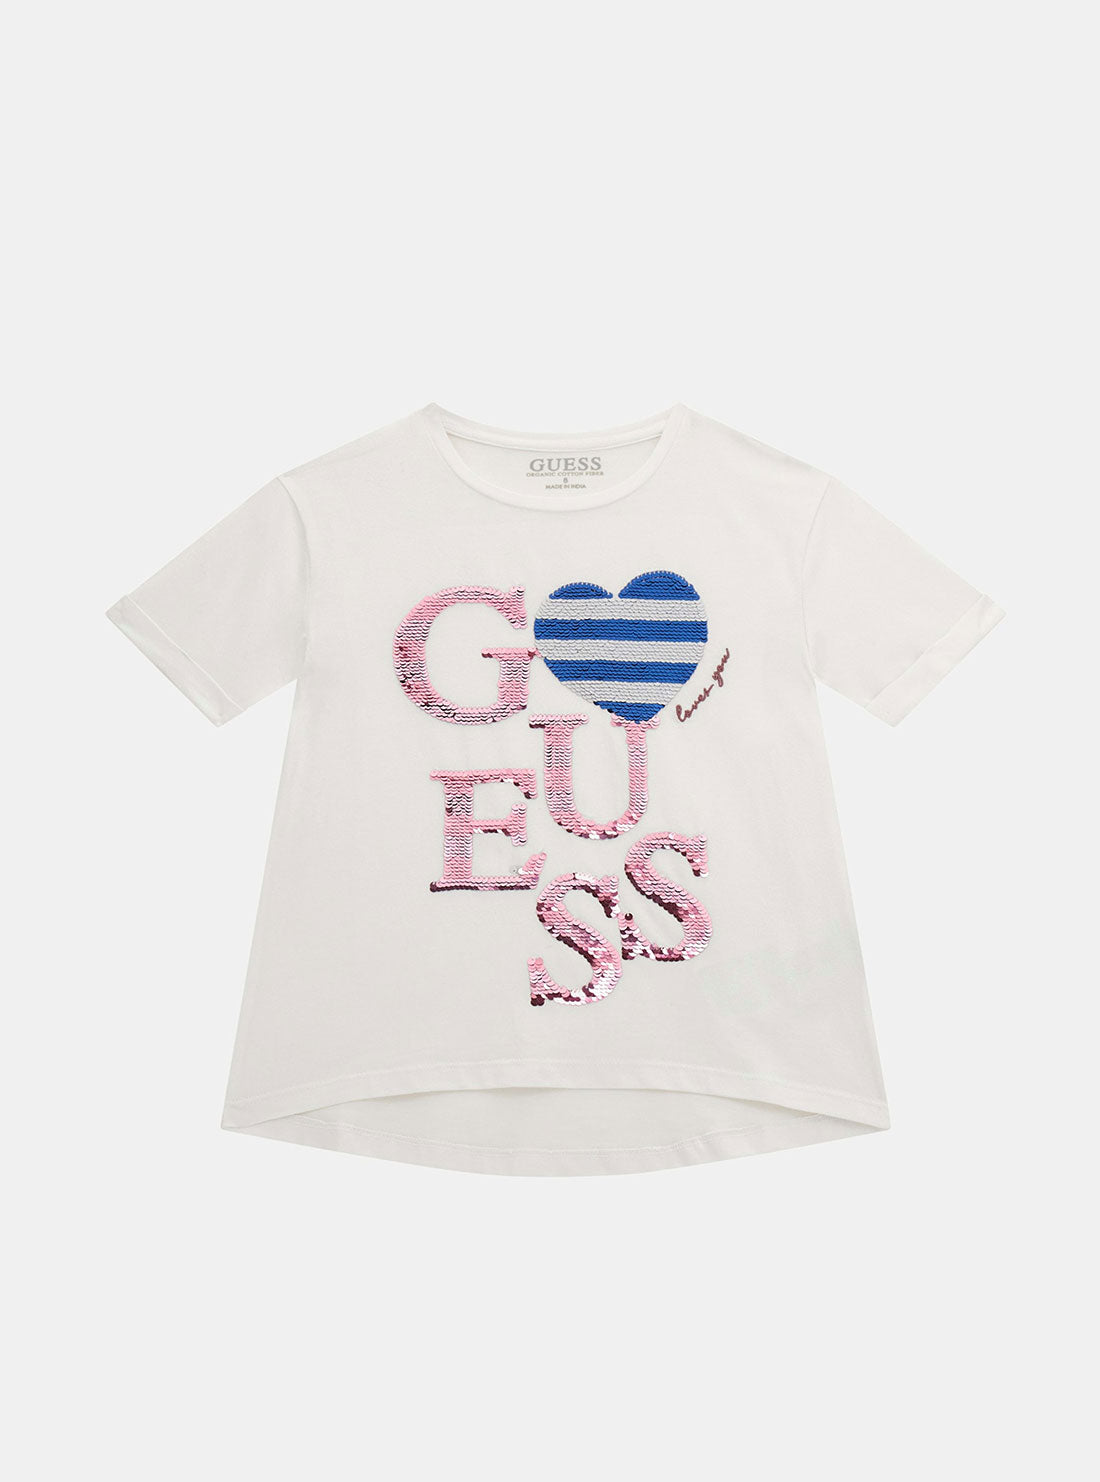 GUESS White Short Sleeve T-Shirt (7-16) front view